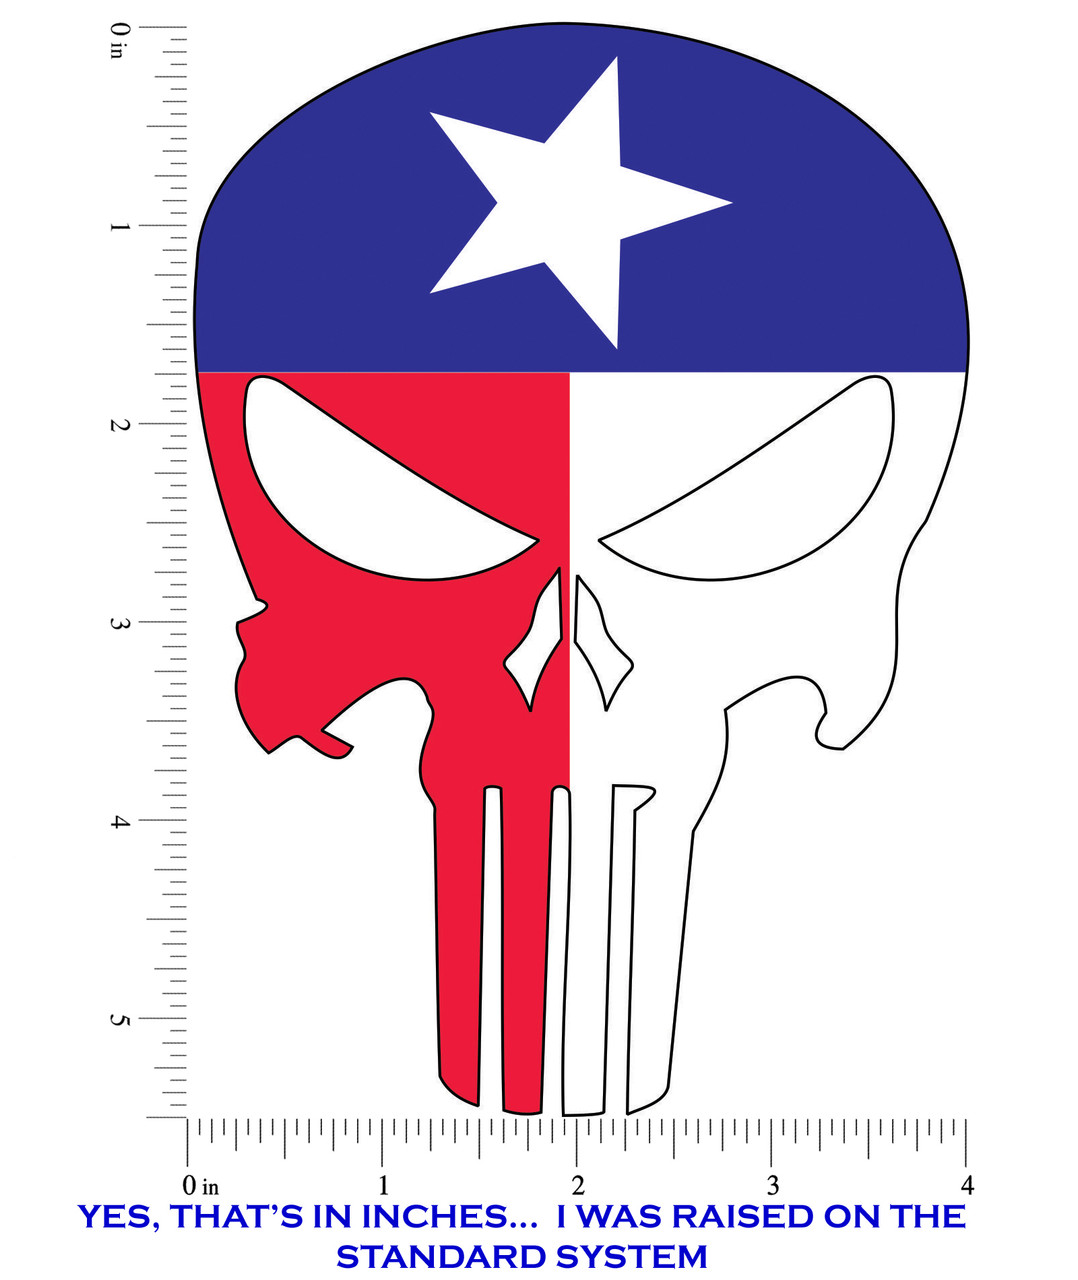 Texas State Flag Punisher Patch (PVC)